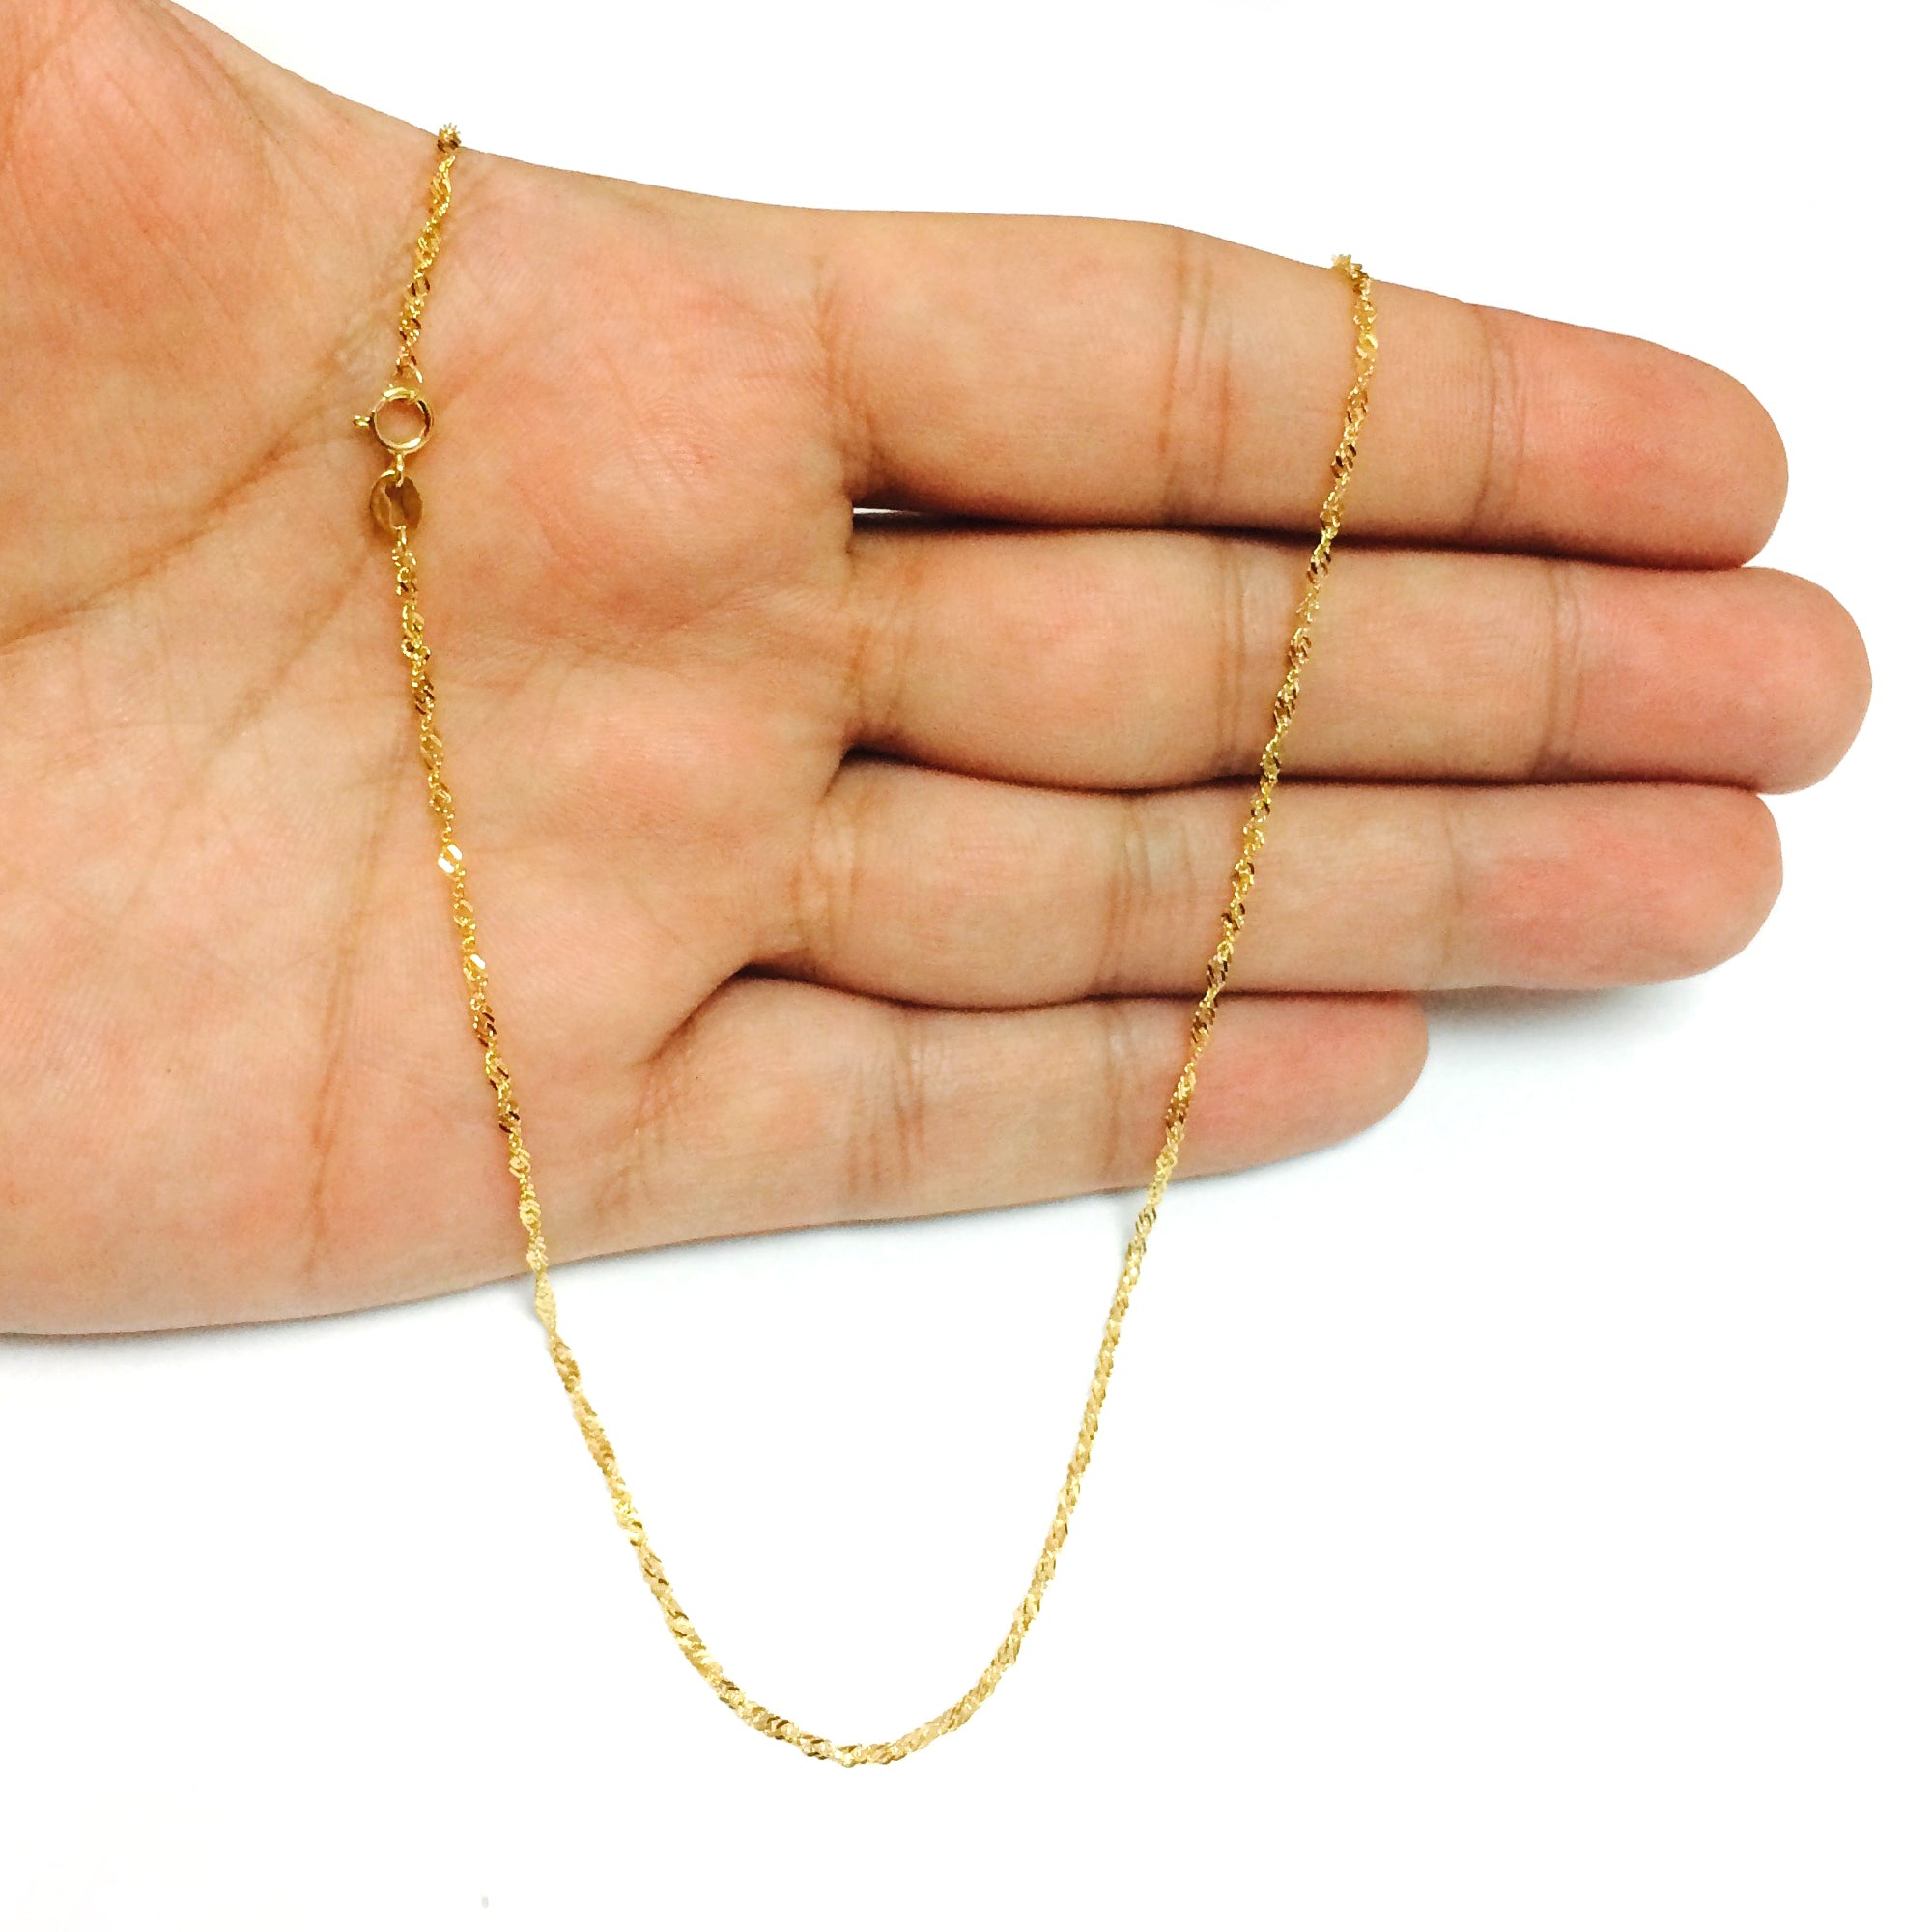 10k Yellow Gold Singapore Chain Necklace, 1.5mm